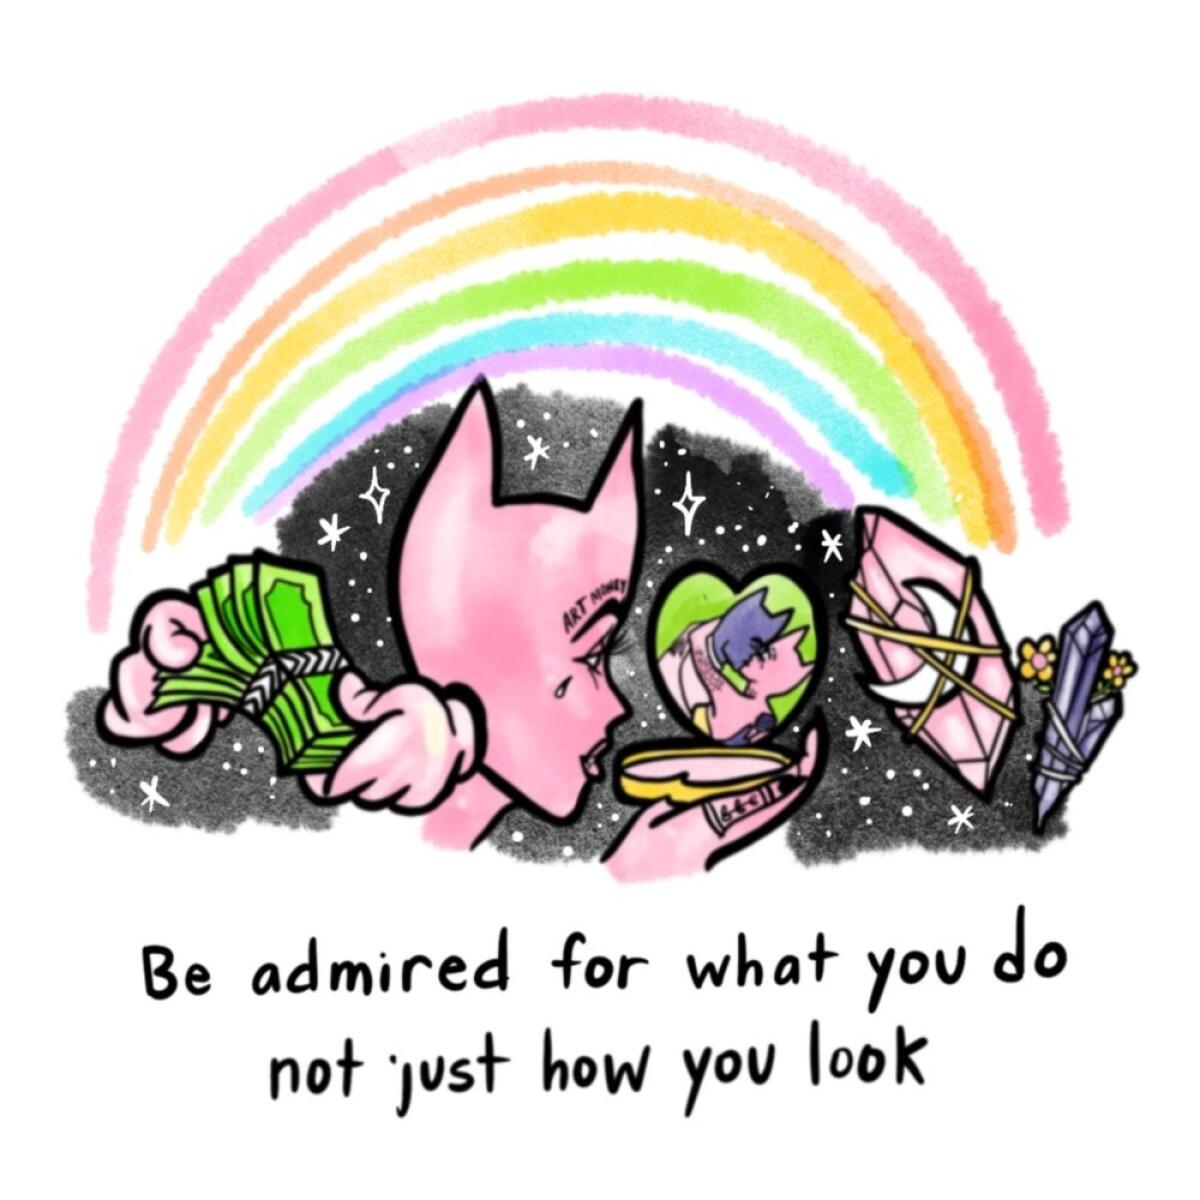 An illustration with the words "Be admired for what you do not just how you look"